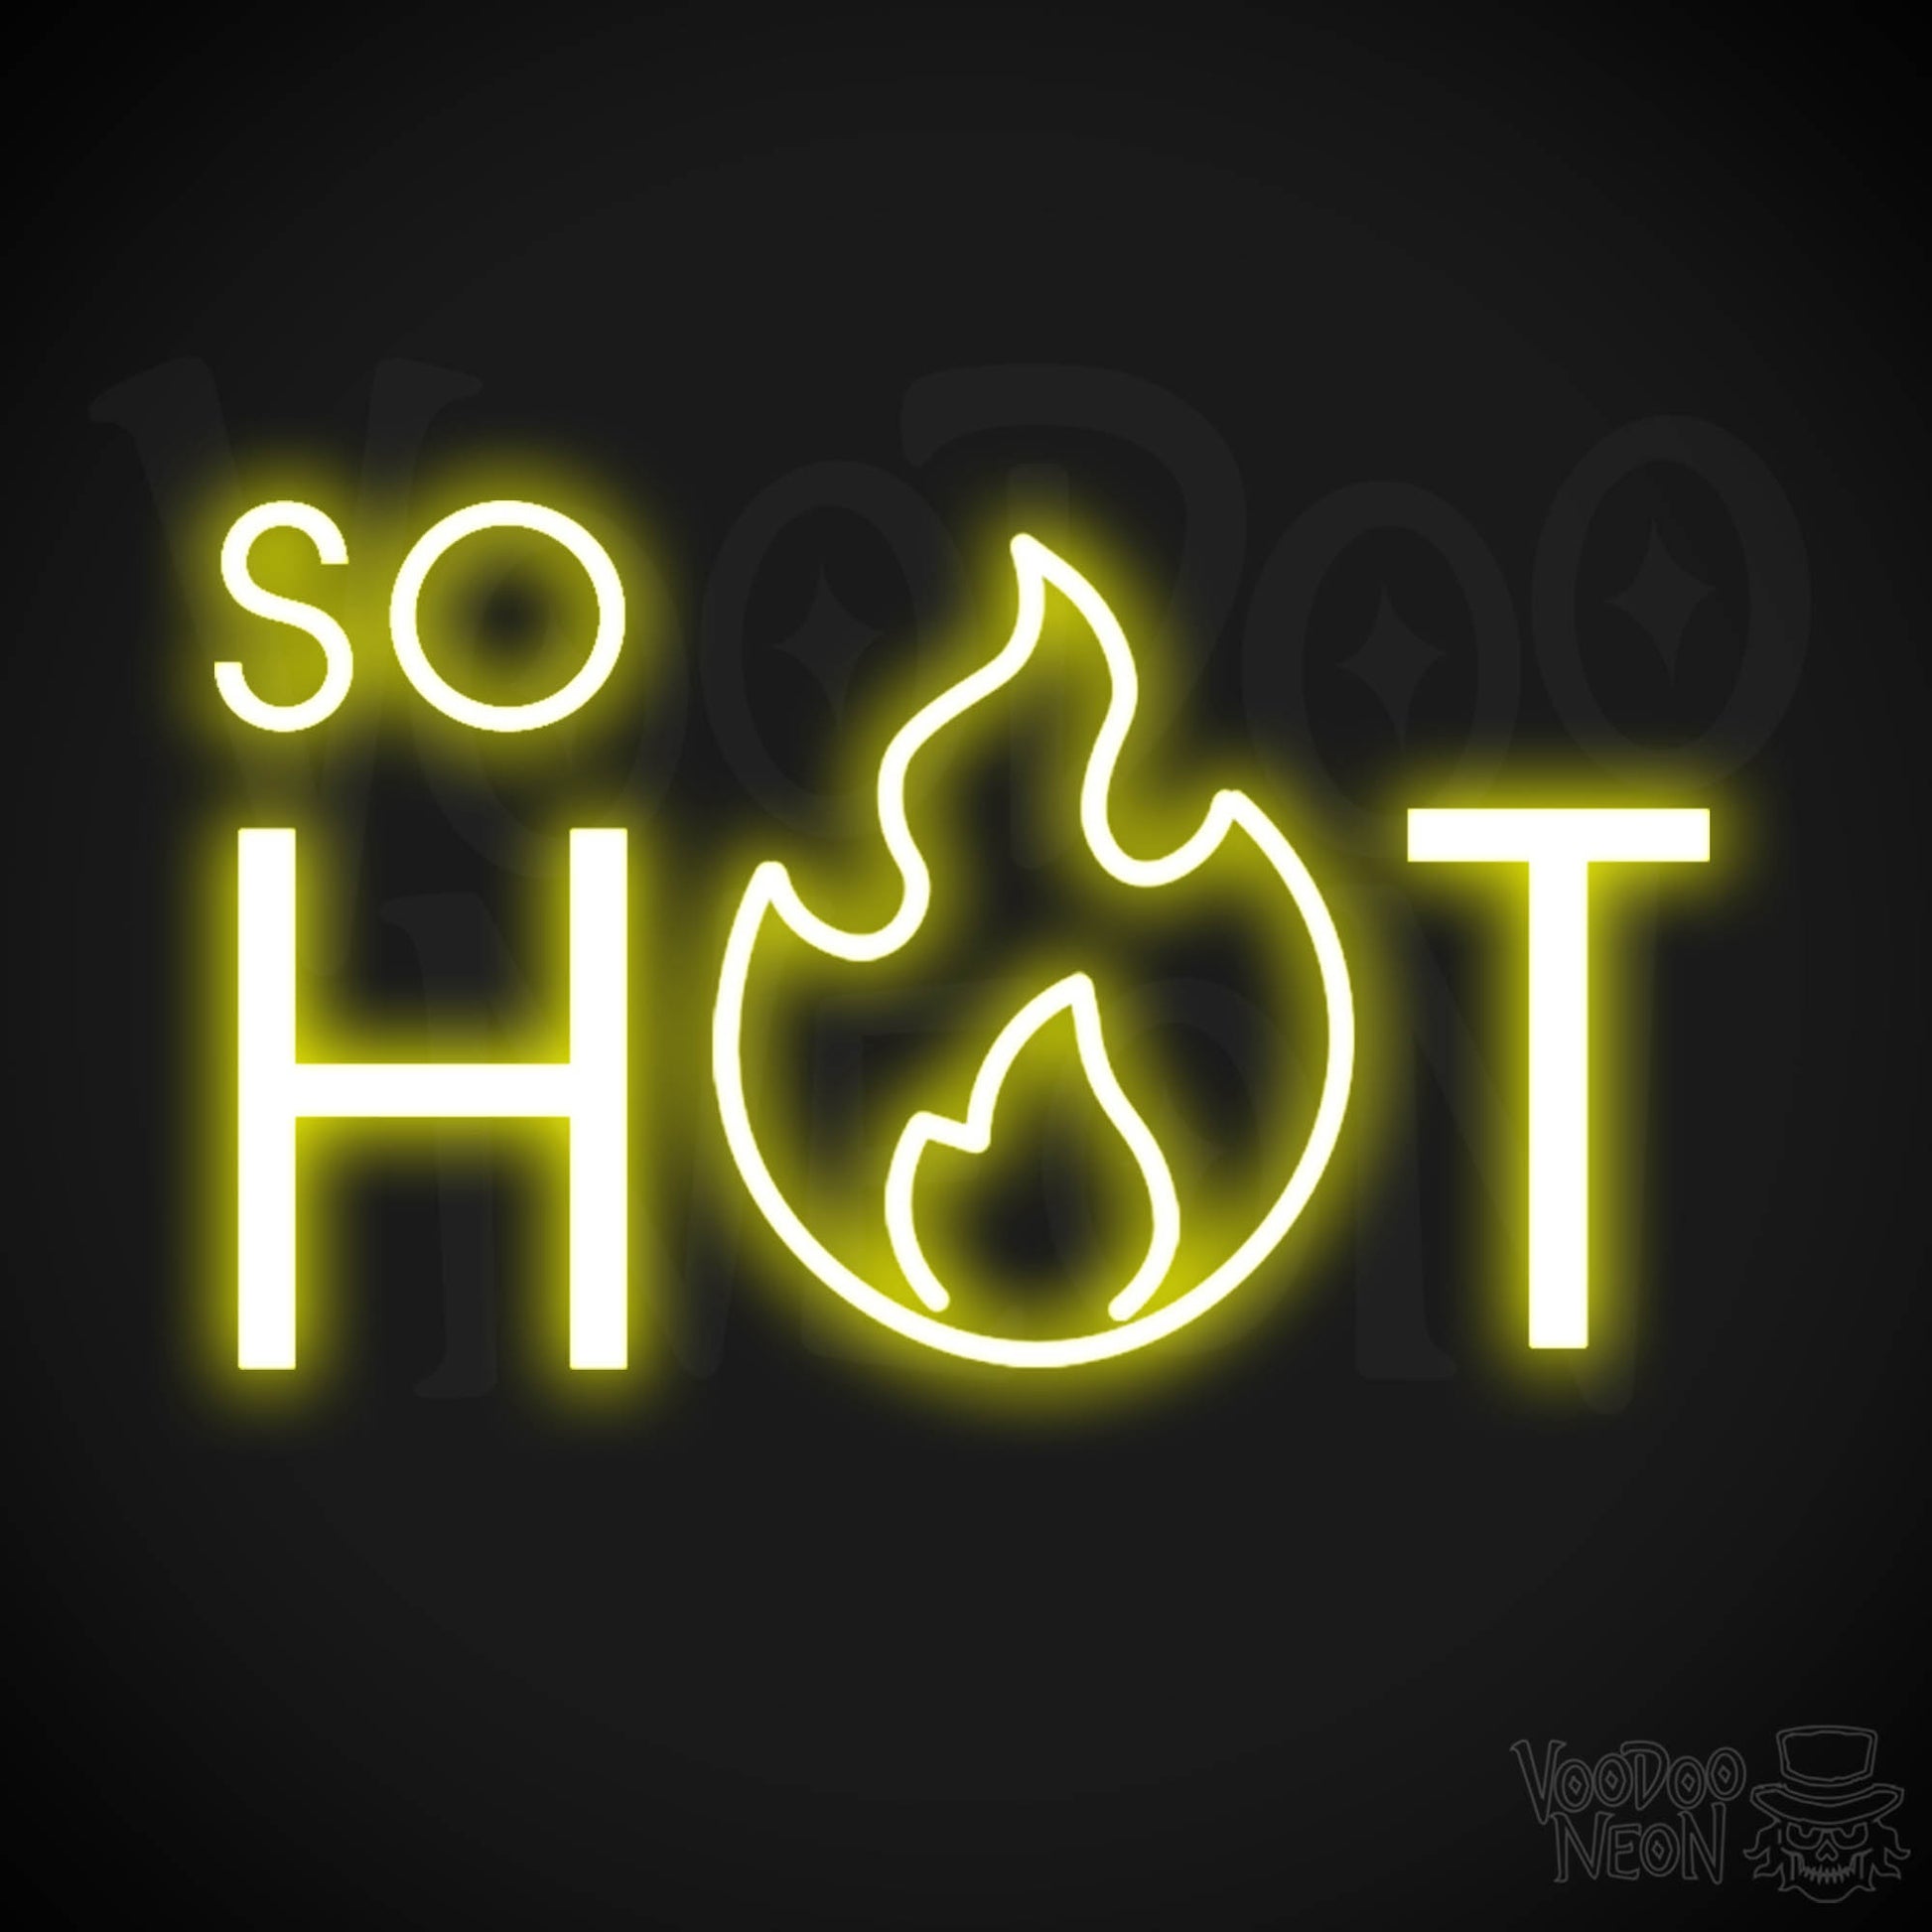 So Hot Neon Sign - Neon So Hot Sign - LED Neon Wall Art - Color Yellow